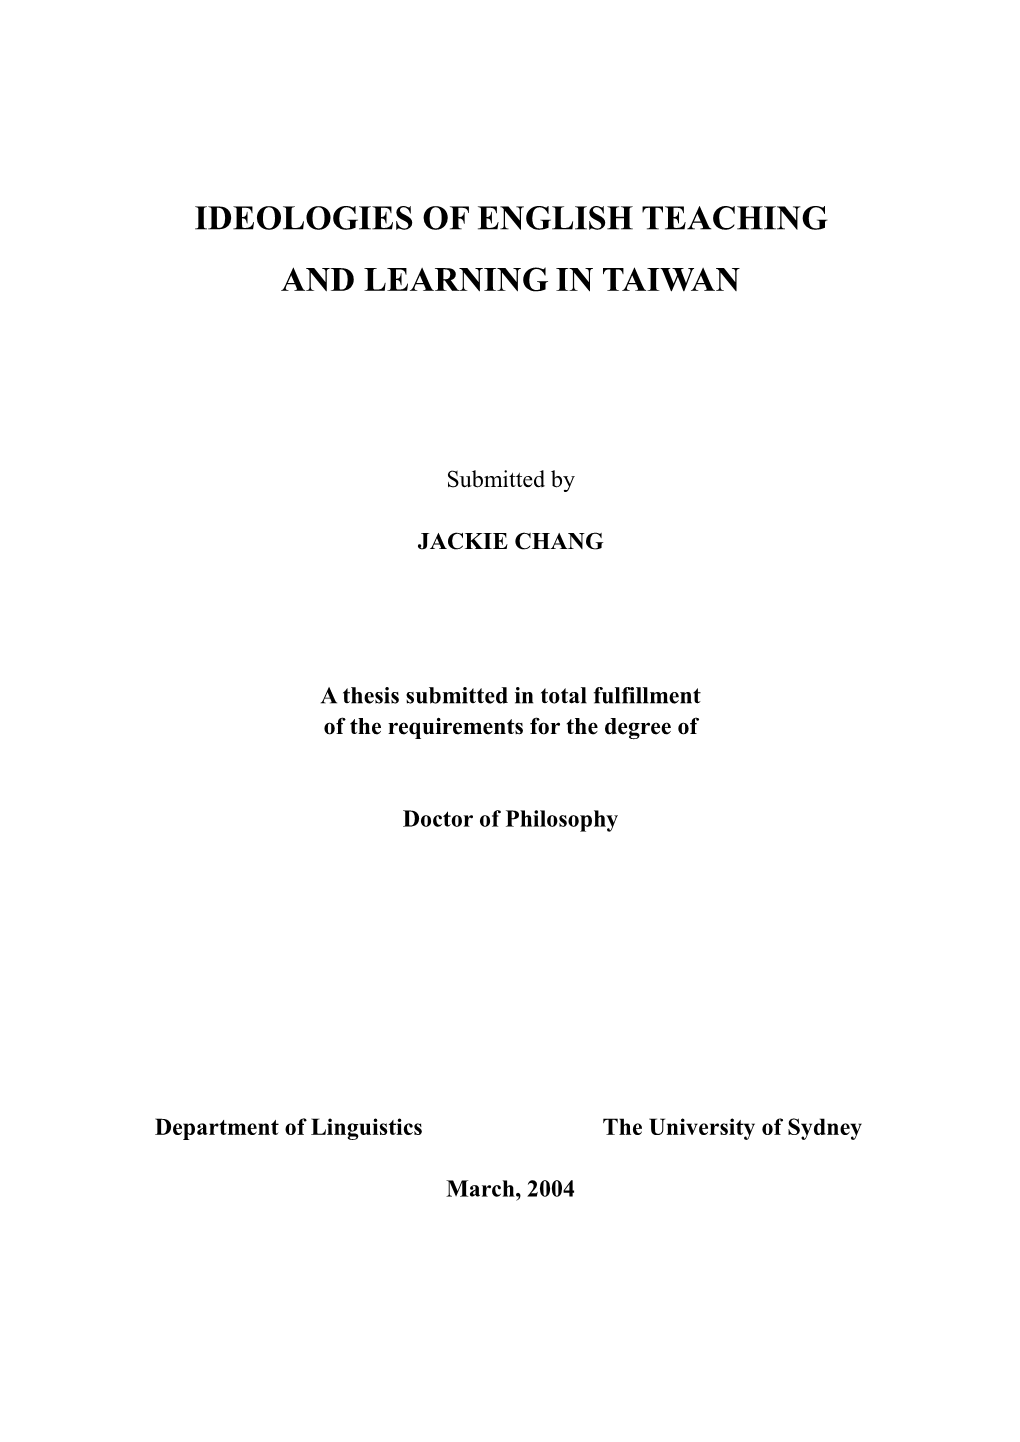 Ideologies of English Teaching and Learning in Taiwan